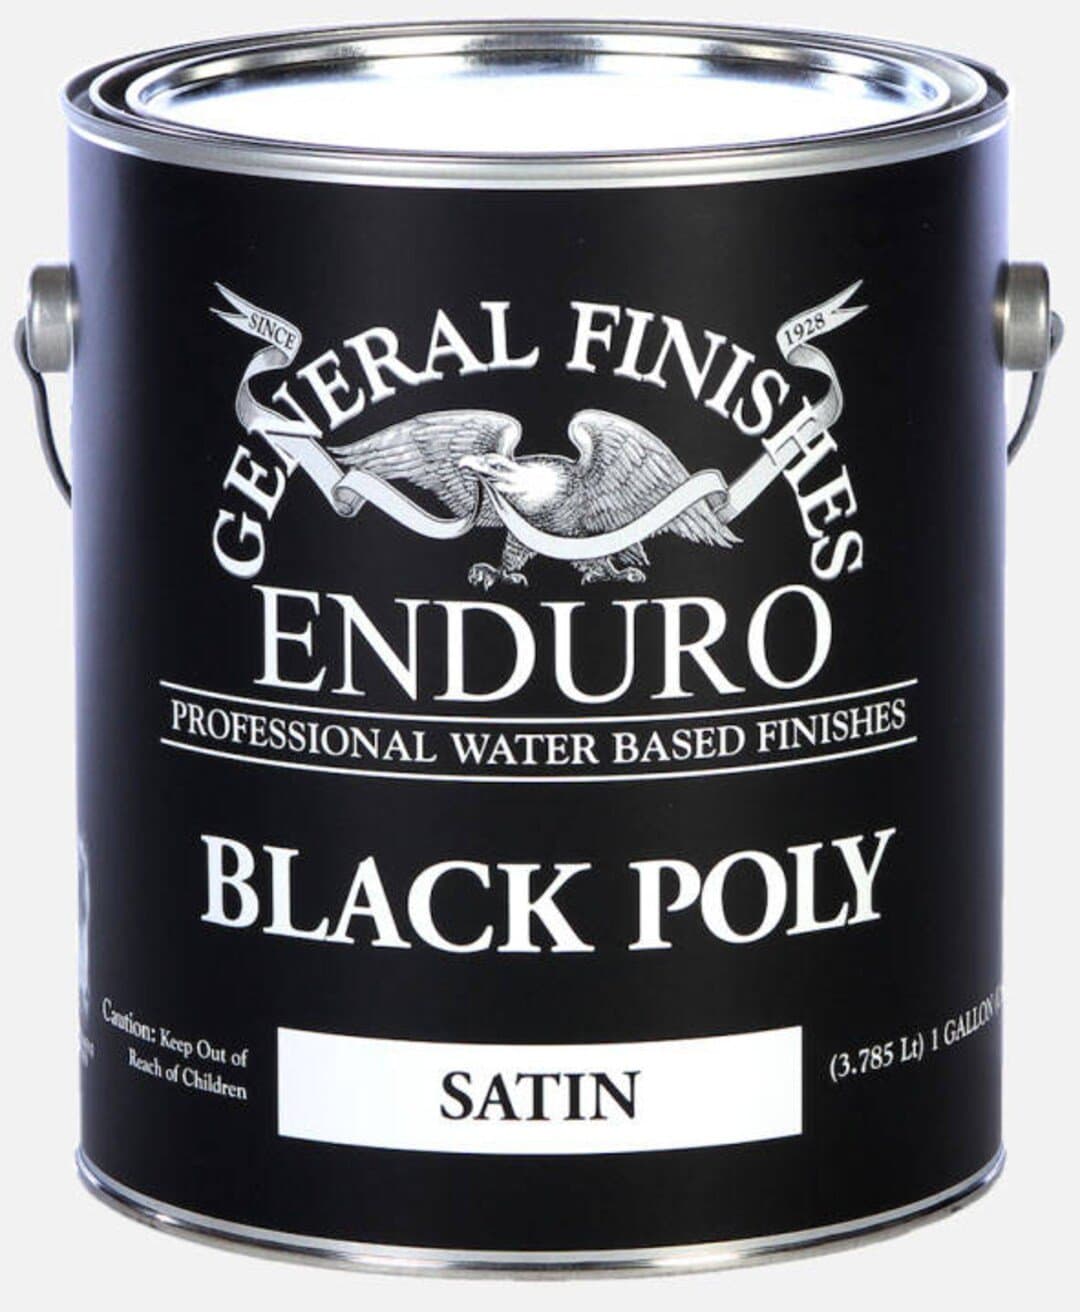 General Finishes Enduro Pigmented Black Poly 